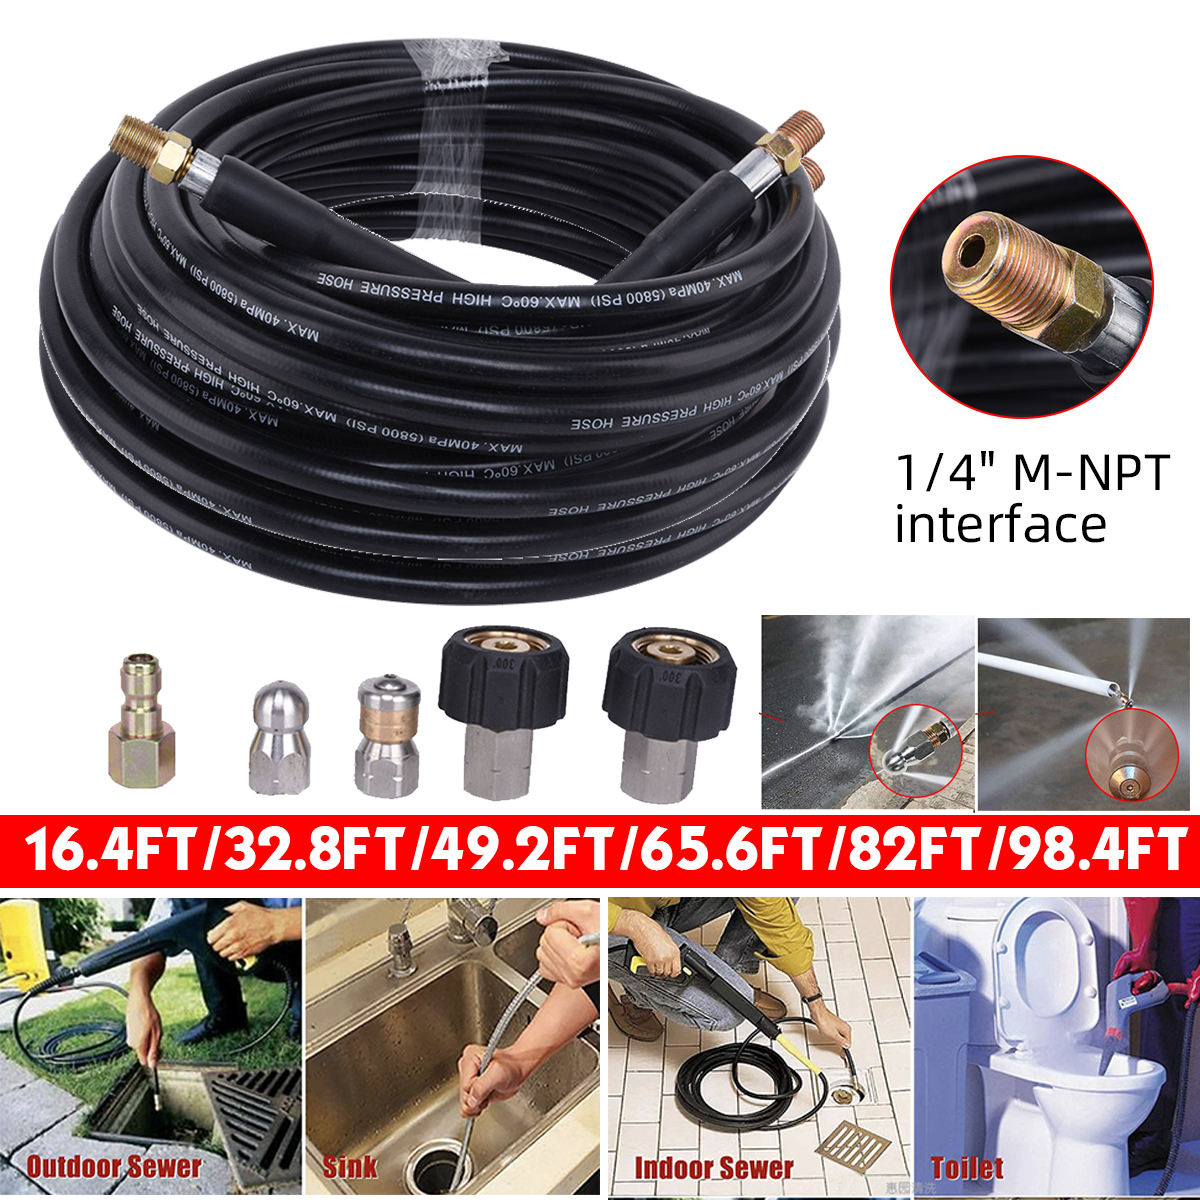 US 30M 1/4'' M-NPT Hose Sewer Line and Drain Jetter Kit W/Sewer Nozzle&Adapter 